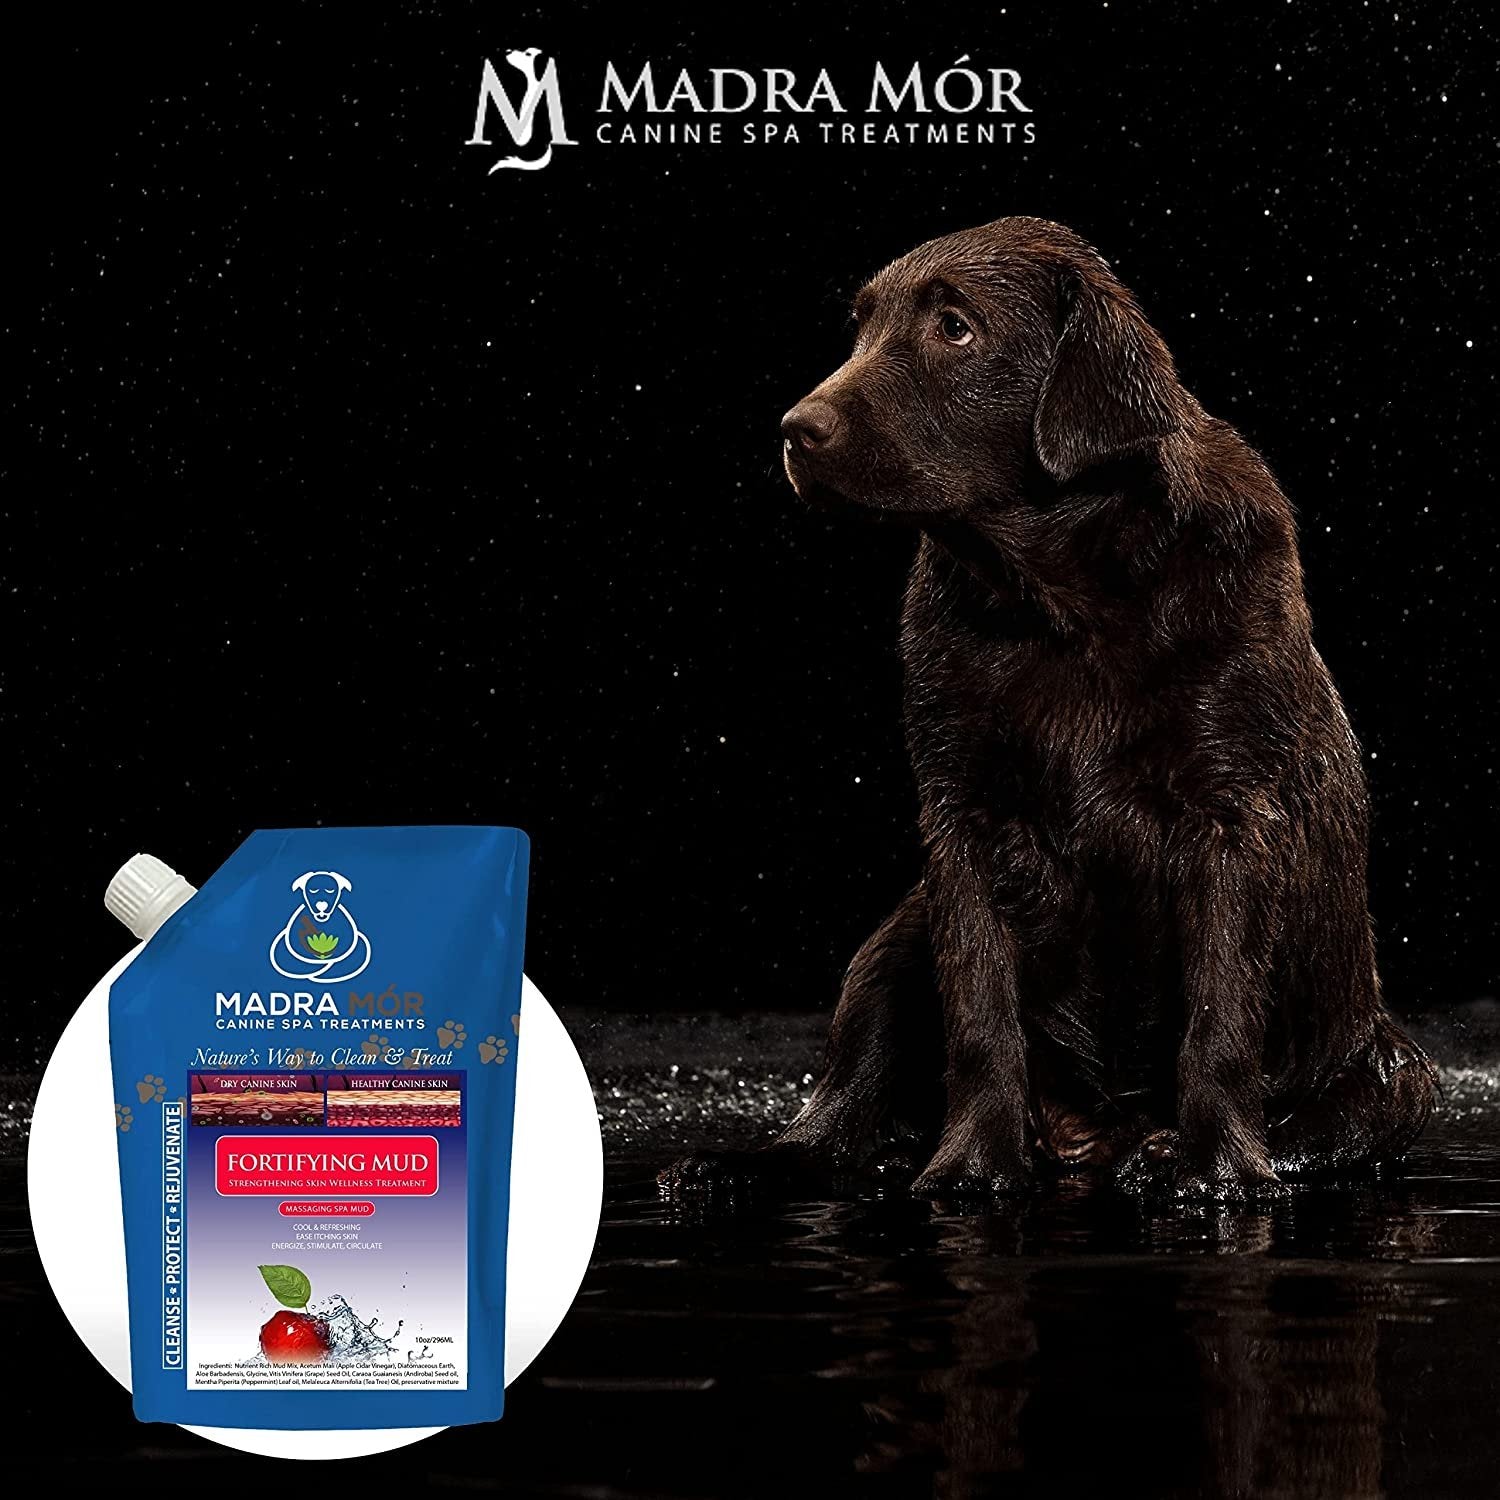 Madra Mor Massaging SPA Mud - Luxurious Dog Skin Wellness Treatment - Cleanse - Protect - Rejuvenate - Fortifying Mud - 1 Pack (10oz) - with Multi-Purpose Key Chain